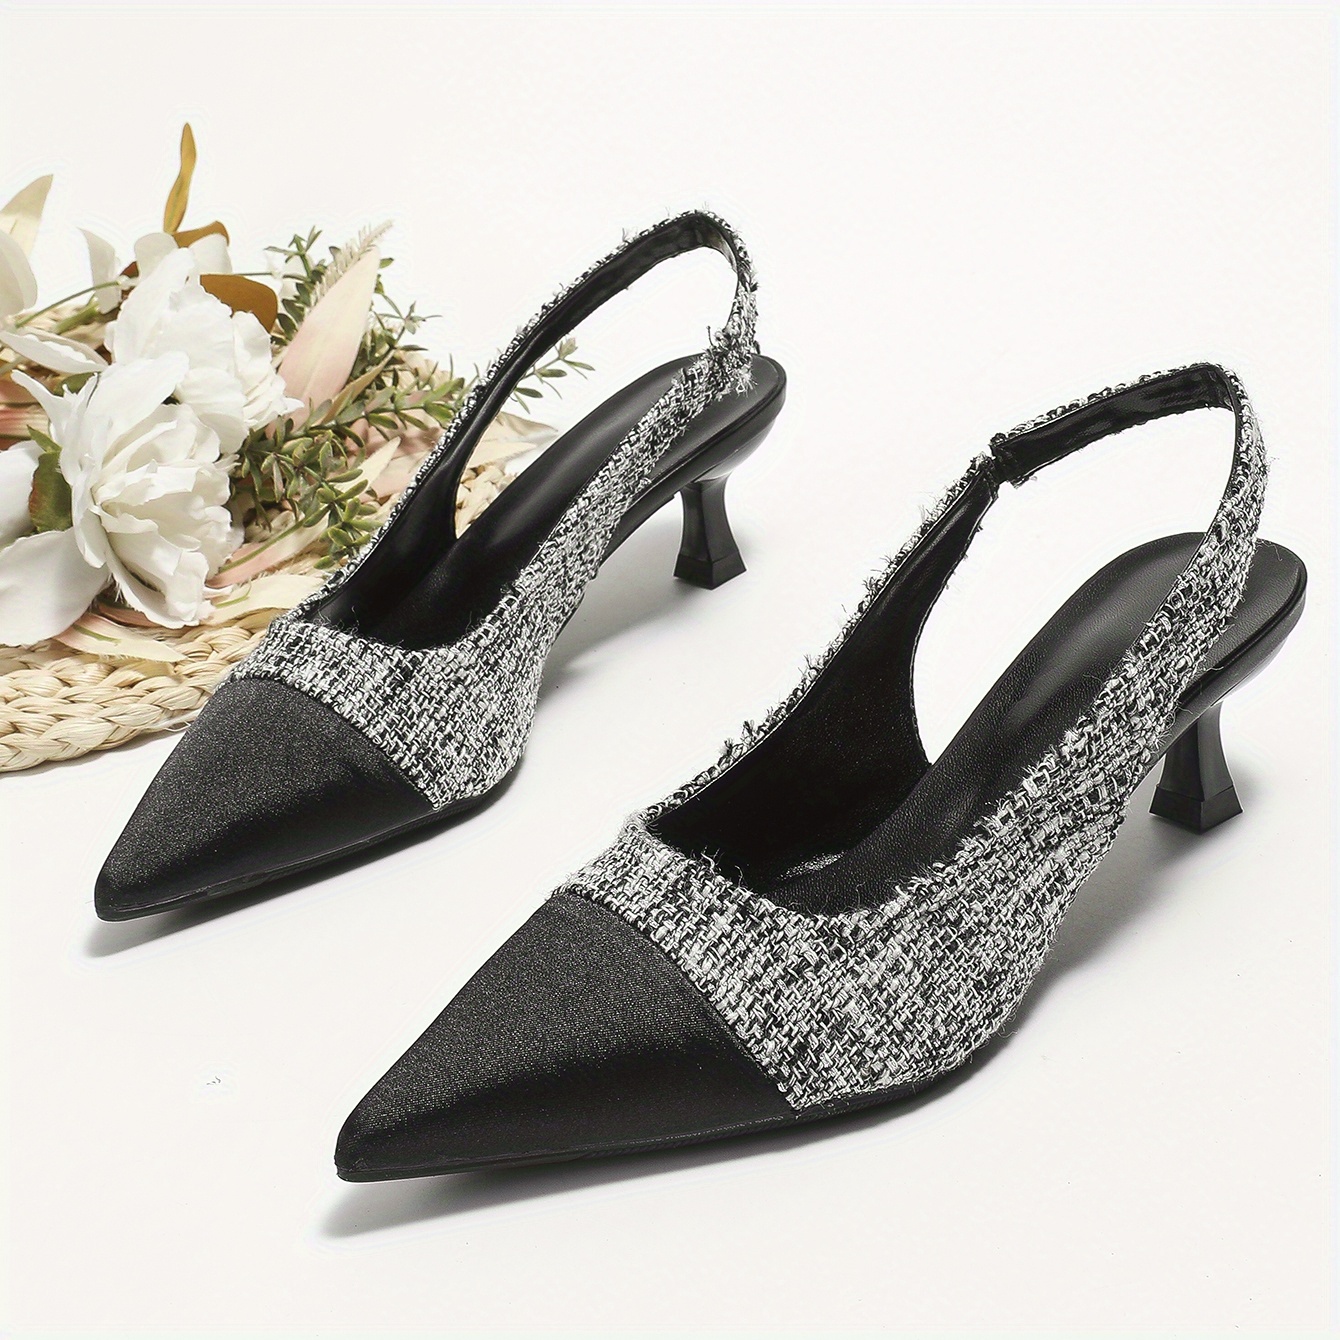 Chanel Grey Tweed and Patent Cap Toe Slingback Pumps Size 37